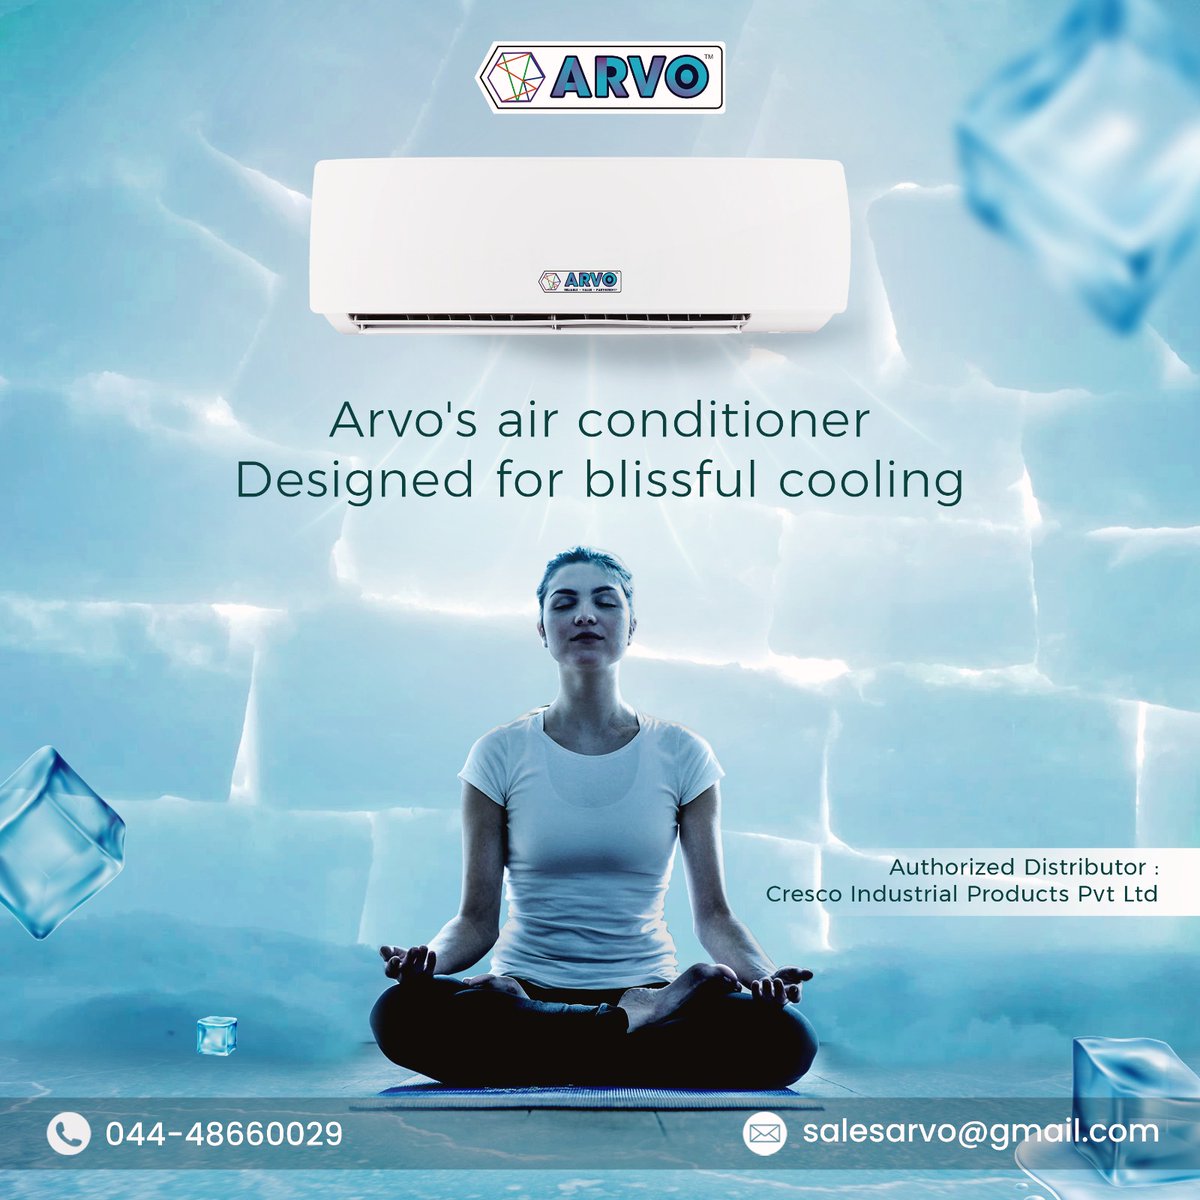 Relax and effortlessly stay cool!

Explore our premium range of sophisticated, luxurious, and stylish air conditioning units.

#Arvo #Cresco #CrescoIndustrialProducts #CoolingPerformance #StayCool #UltimateComfort #AirConditioning #EnergyEfficiency #IntelligentFeatures